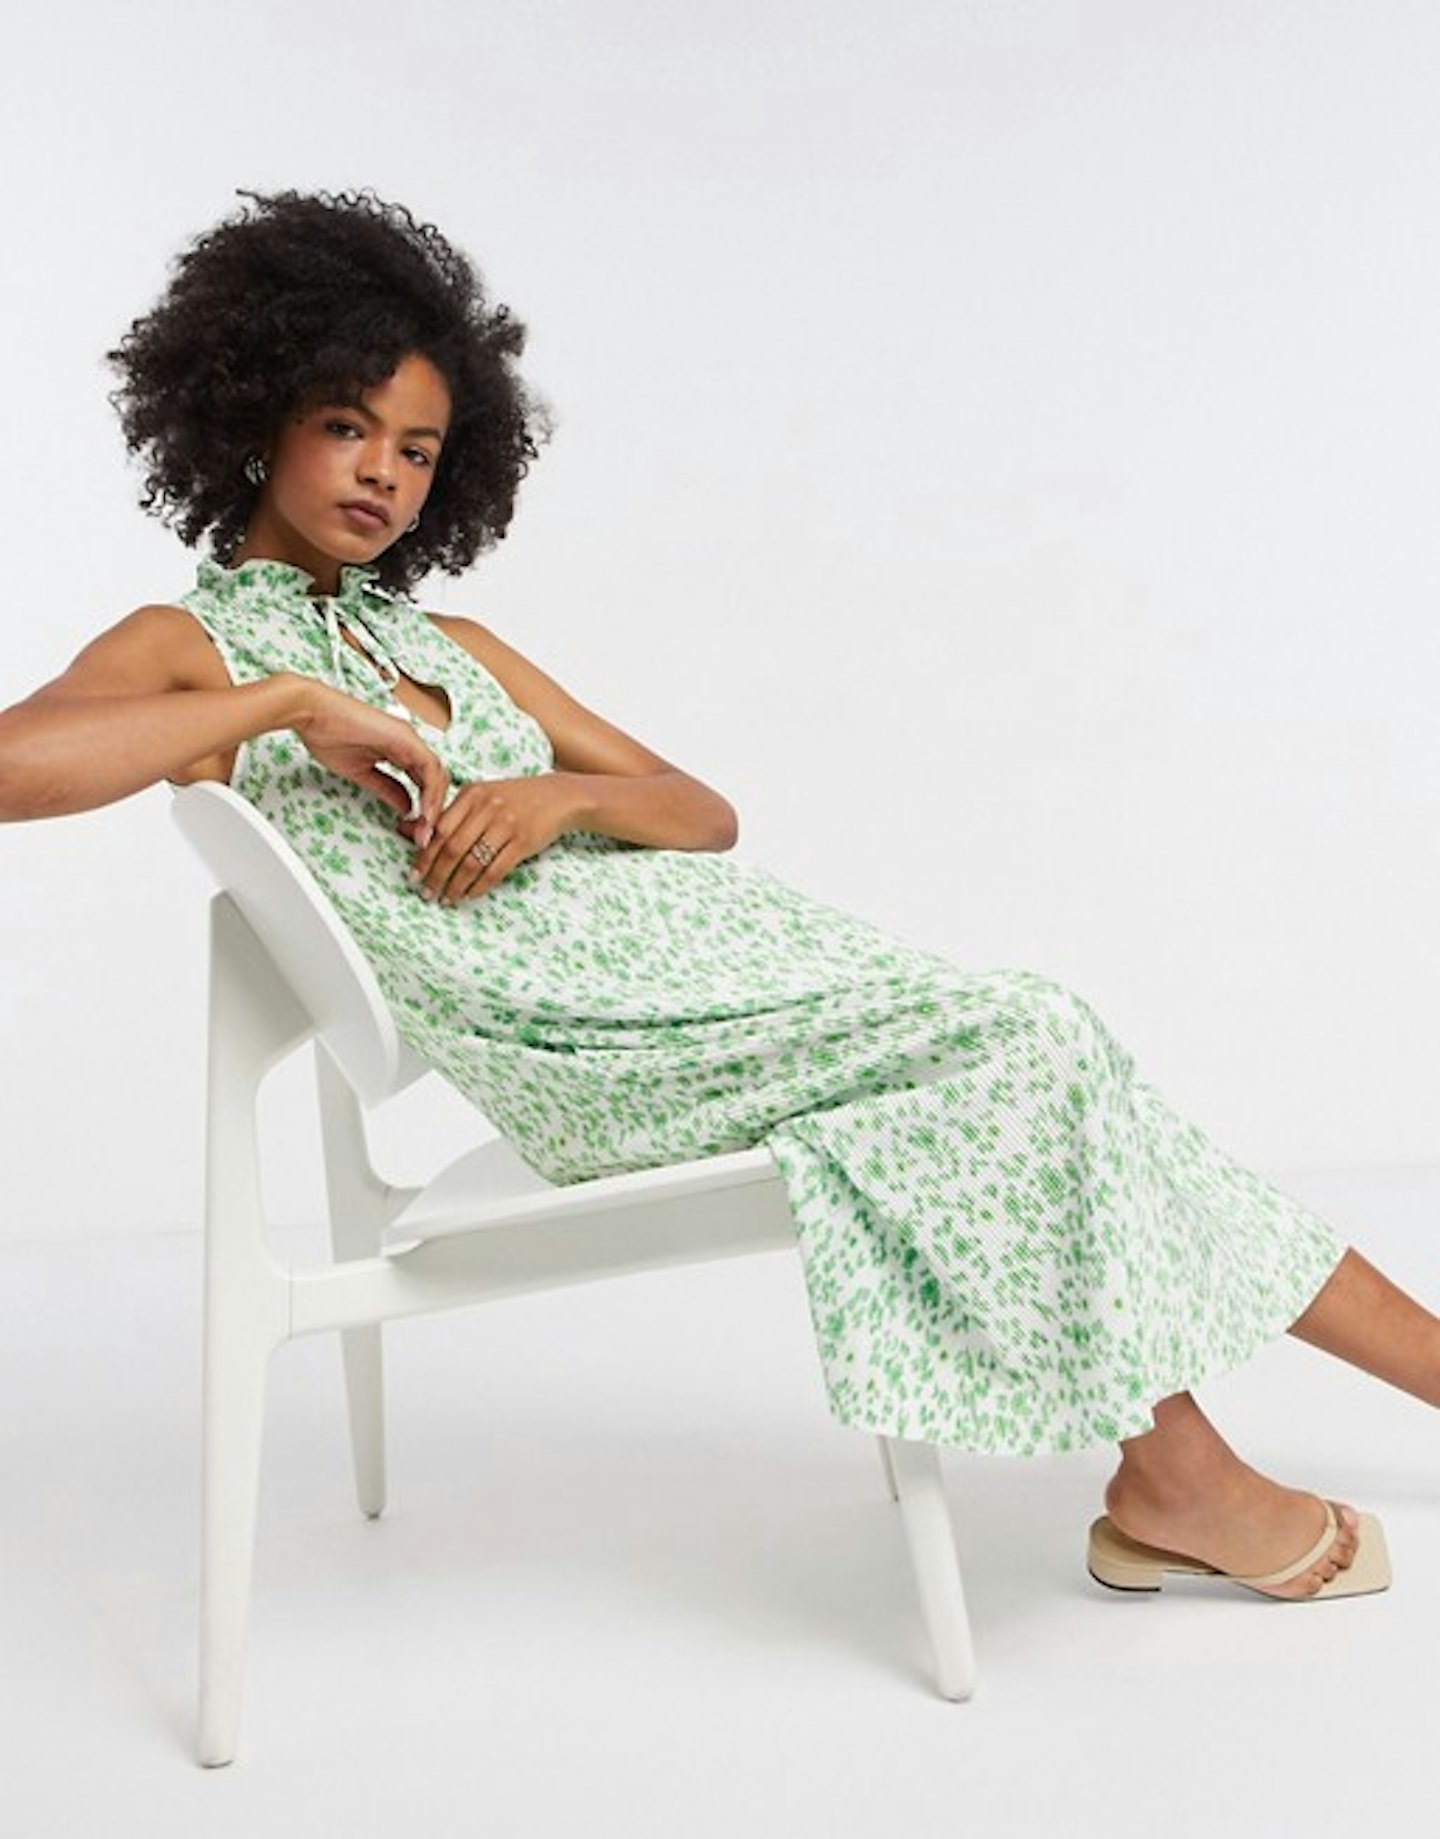 ASOS, Plisse Midi Dress With Frill Neck In Green Floral, £30